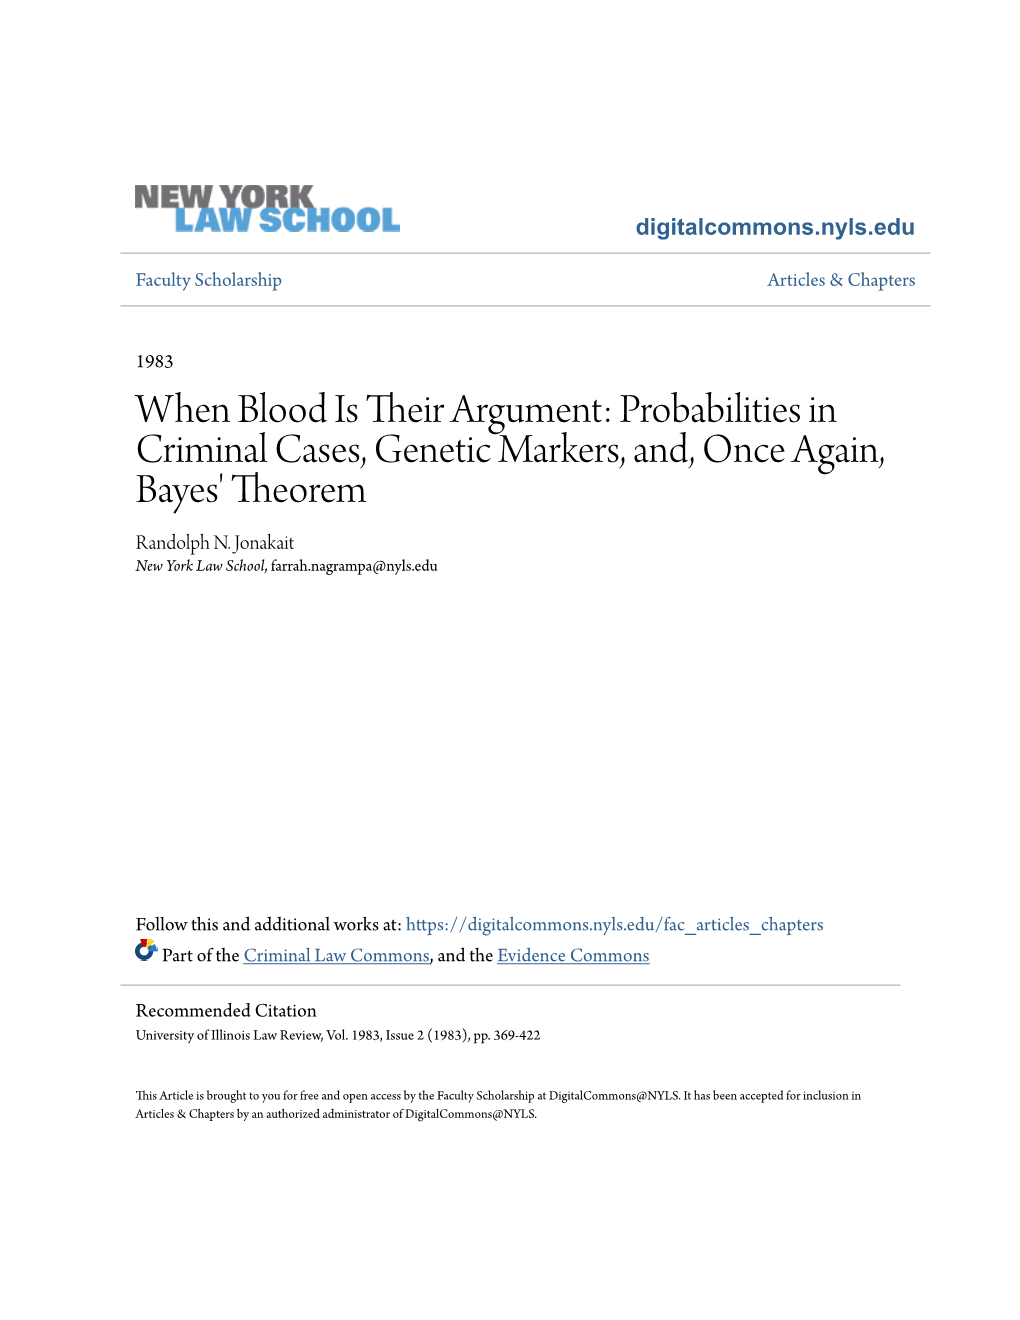 When Blood Is Their Argument: Probabilities in Criminal Cases, Genetic Markers, And, Once Again, Bayes' Theorem Randolph N